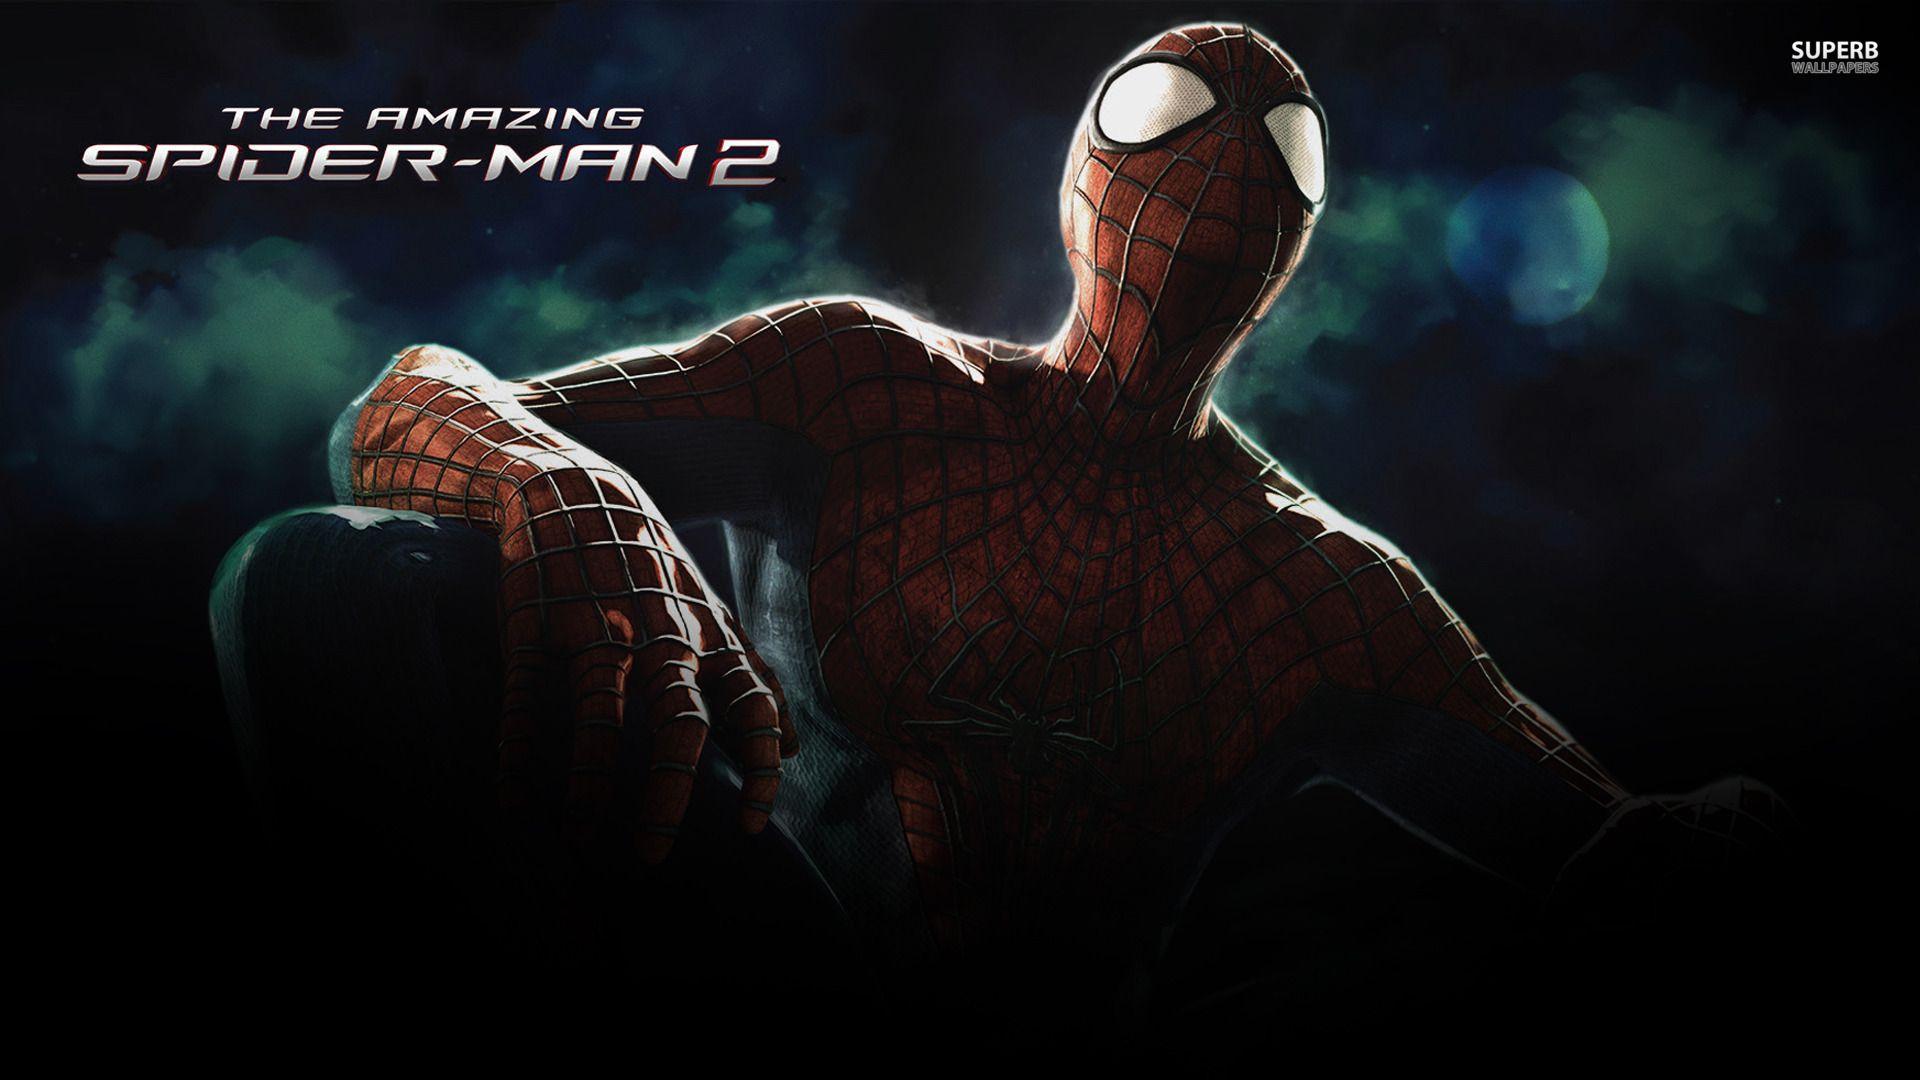 The Amazing Spider Man 2 Wallpaper and Picture. Download